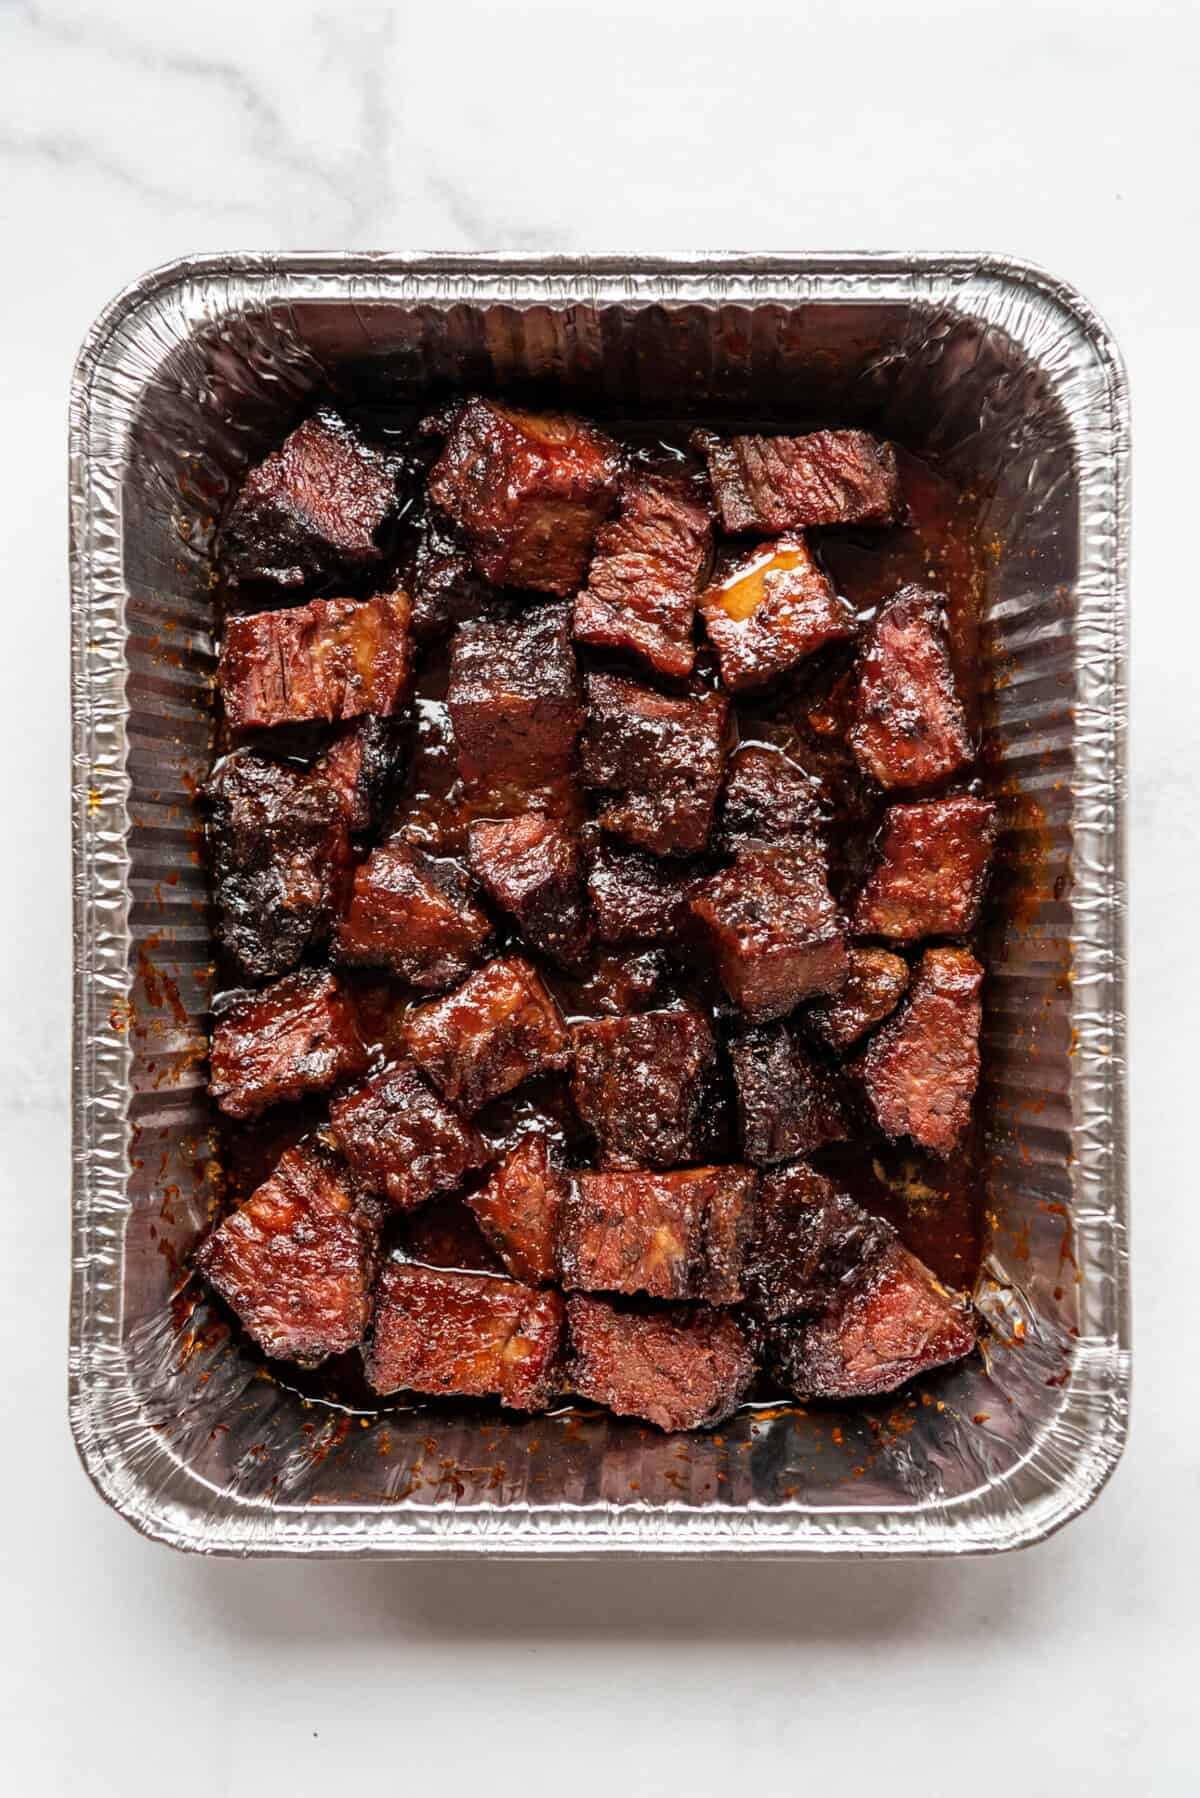 Finished brisket burnt ends in an aluminum pan.